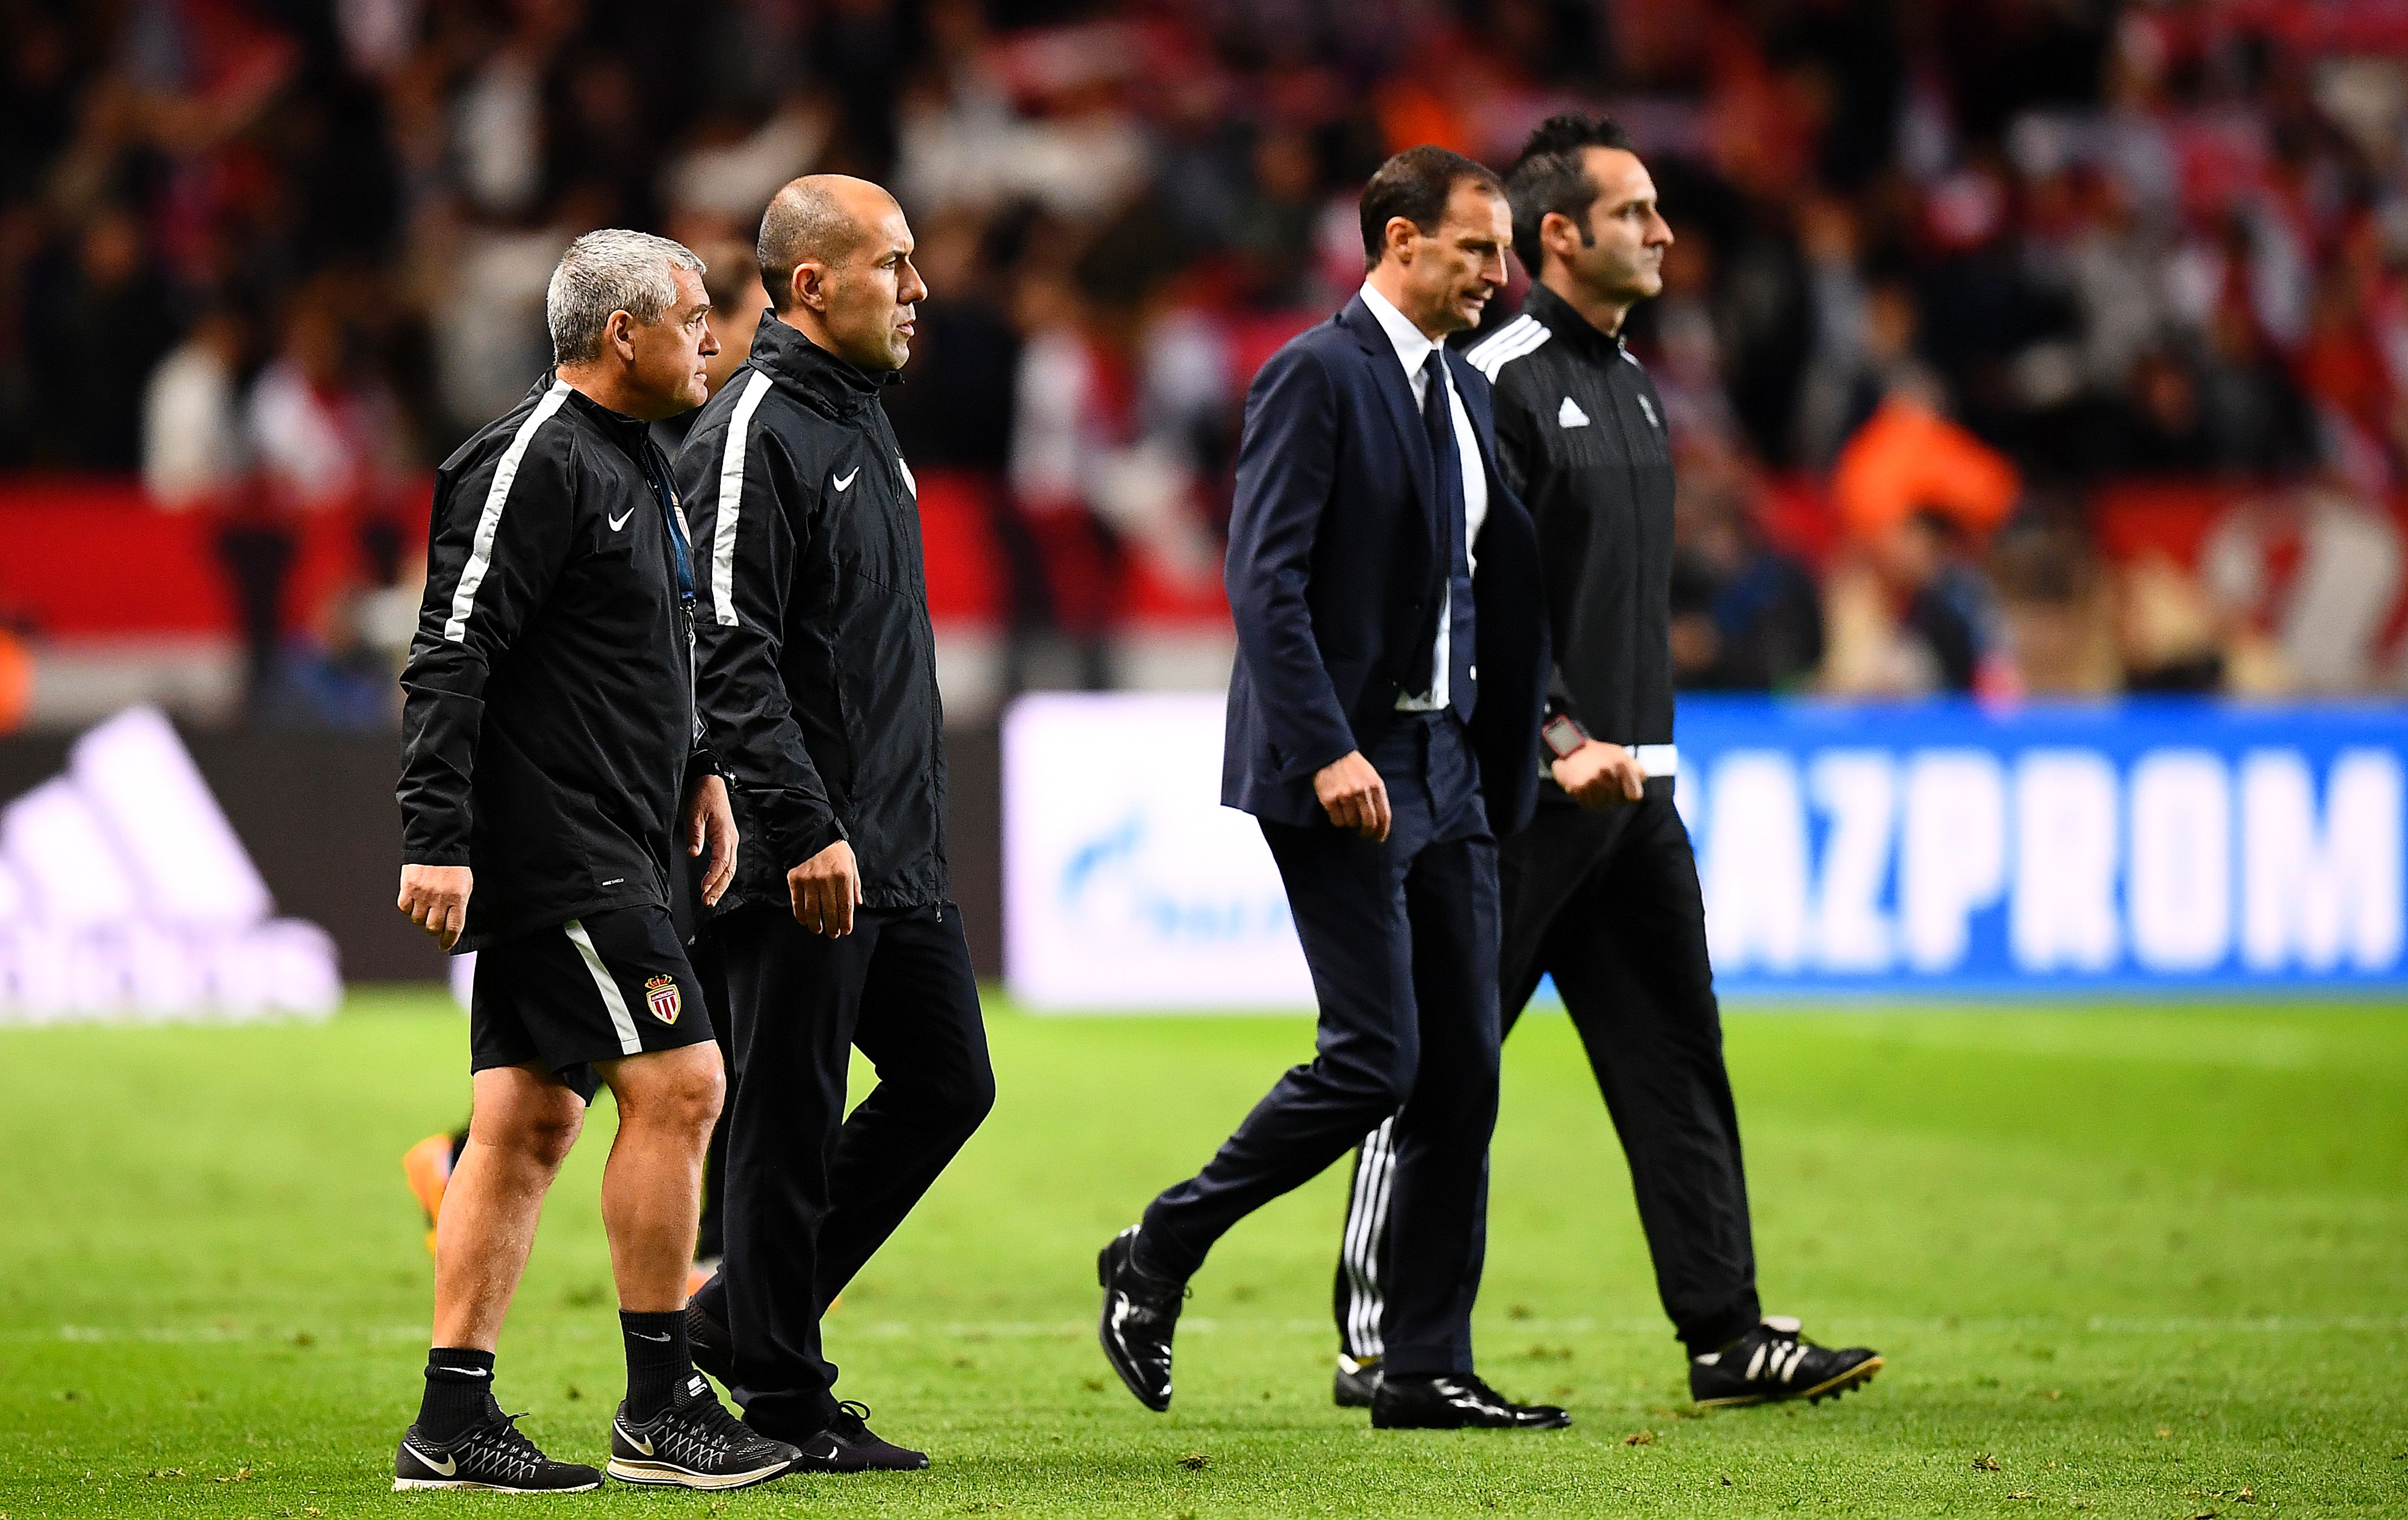 Juventus' Italian head coach Massimiliano Allegri (C) and Monaco's Portuguese coach Leonardo Jardim (L) leave the pitch during the UEFA Champions League semi-final first leg football match between Monaco and Juventus at Stade Louis II Stadium in Monaco on May 3, 2017.   / AFP PHOTO / FRANCK FIFE        (Photo credit should read FRANCK FIFE/AFP/Getty Images)